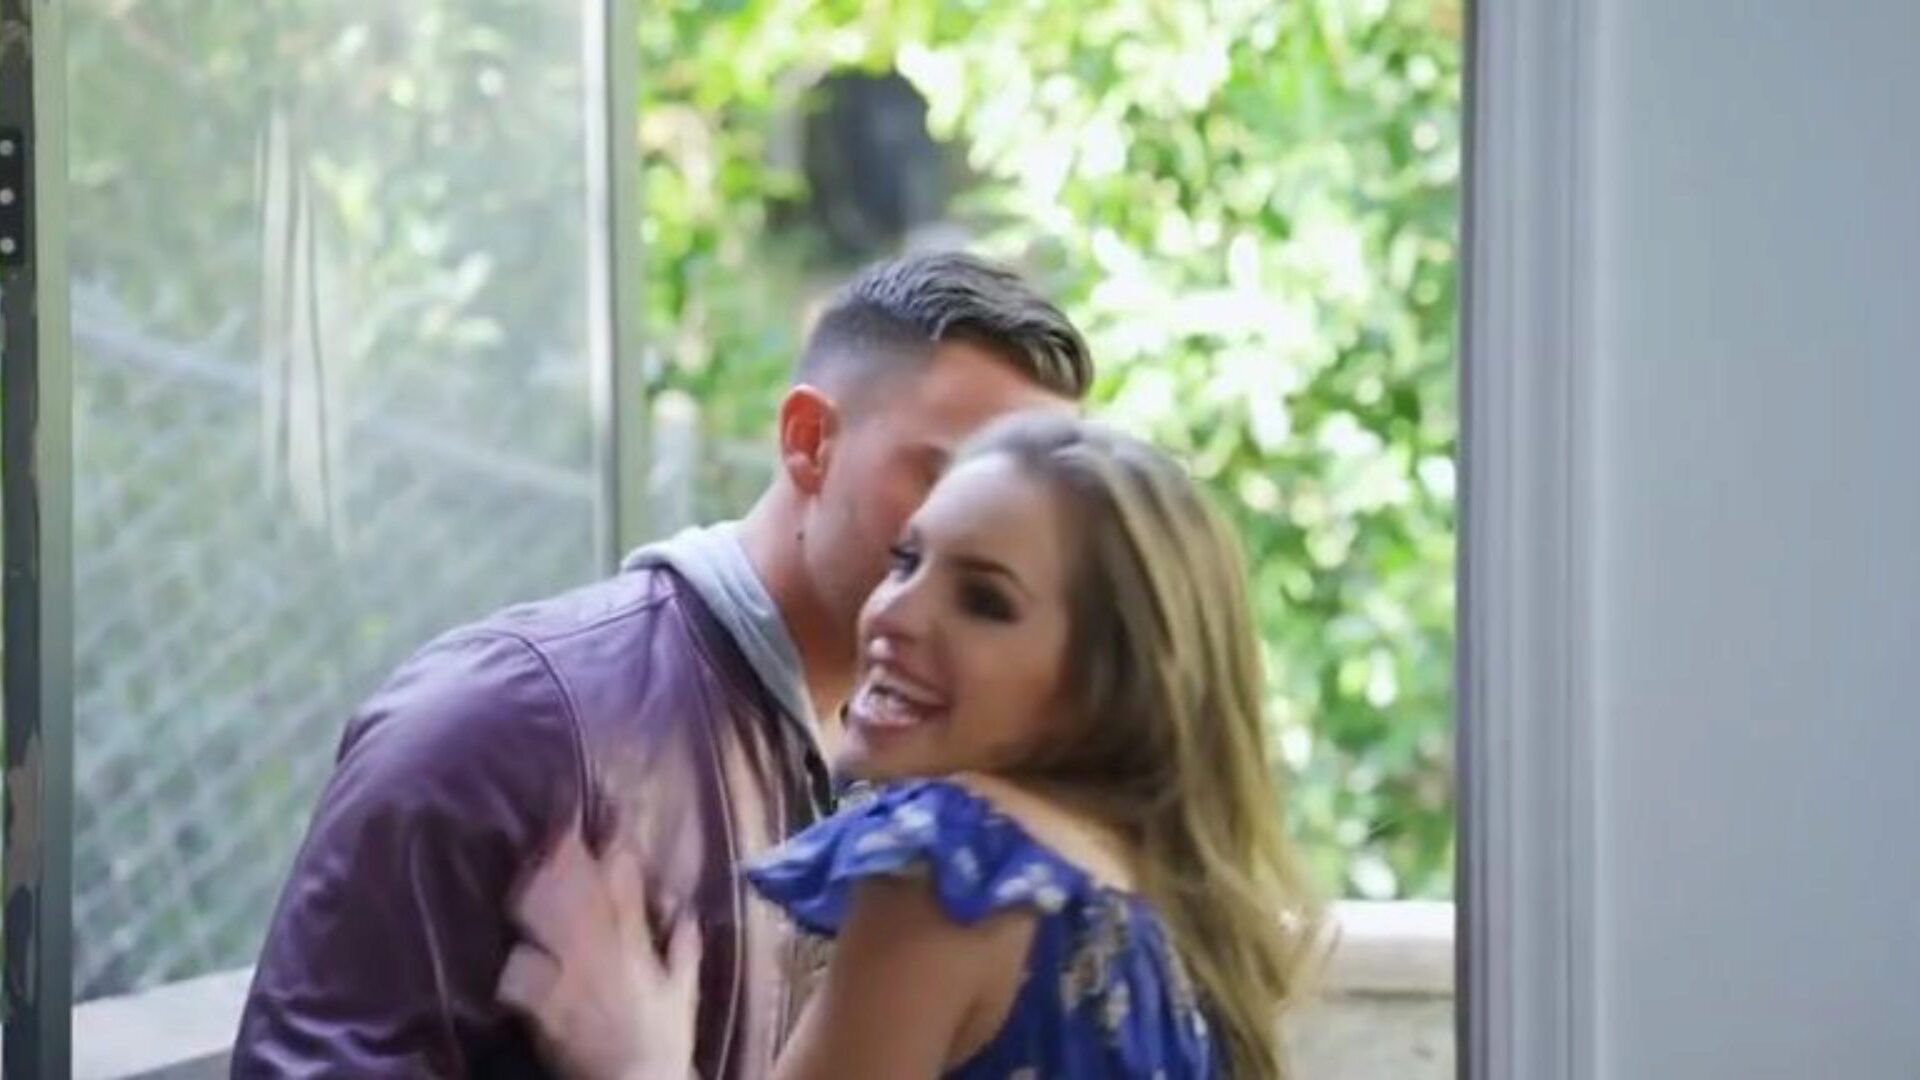 Kimmy Granger and Her Stepma Team Up to Engulf American Sweetheart Kimmy Granger invited her Boyfriend over to present him and his distinct Southern Charm to her Daddy and Stepmom. Well, this boy made a rigid Impression that's for sure!